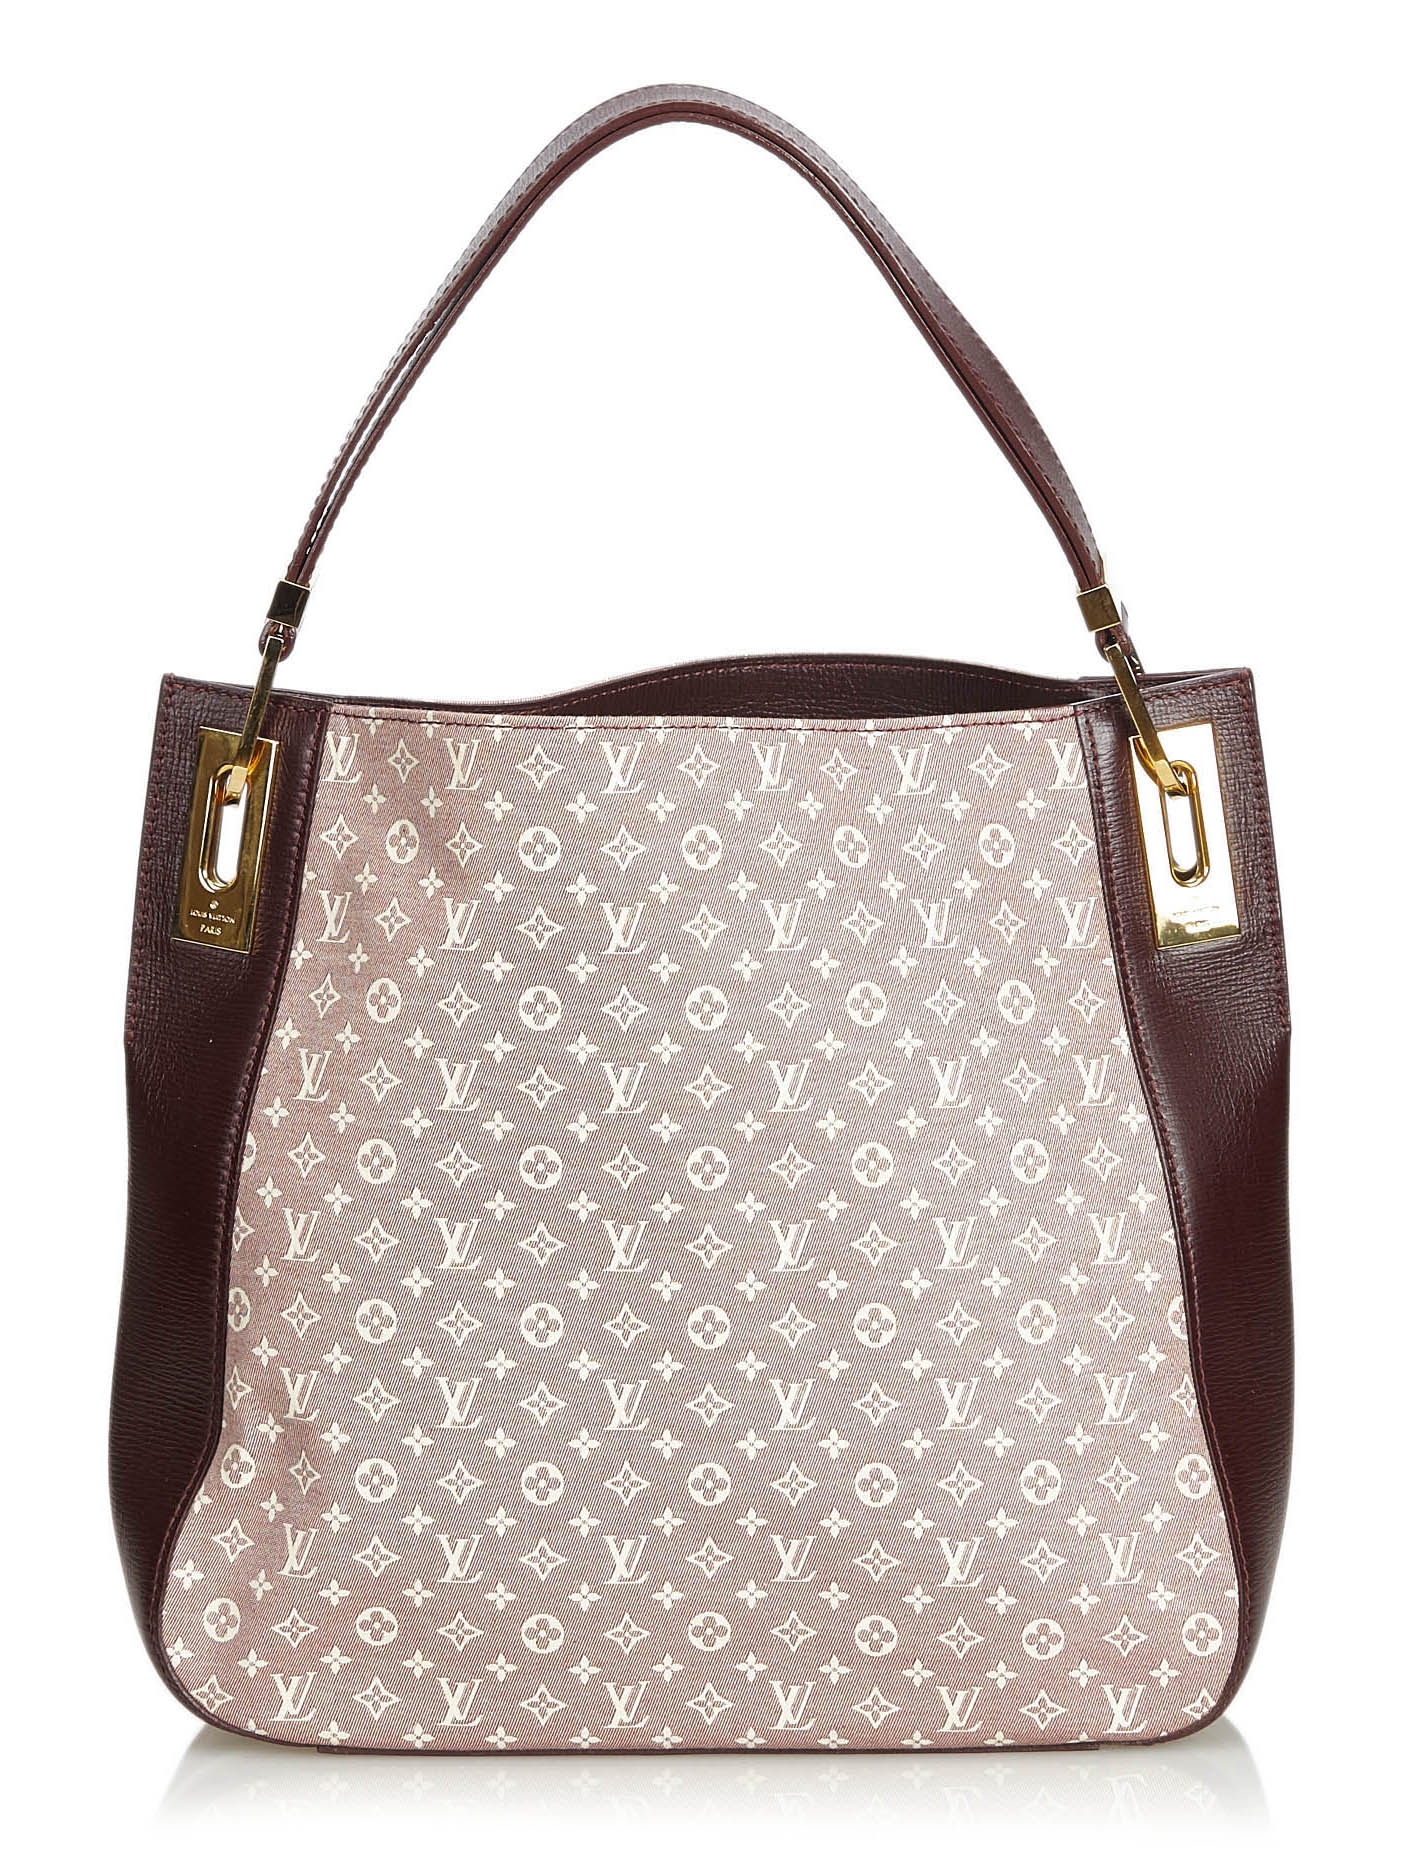 Louis Vuitton handbag in beige monogram canvas Idylle and brown leather, RvceShops Revival